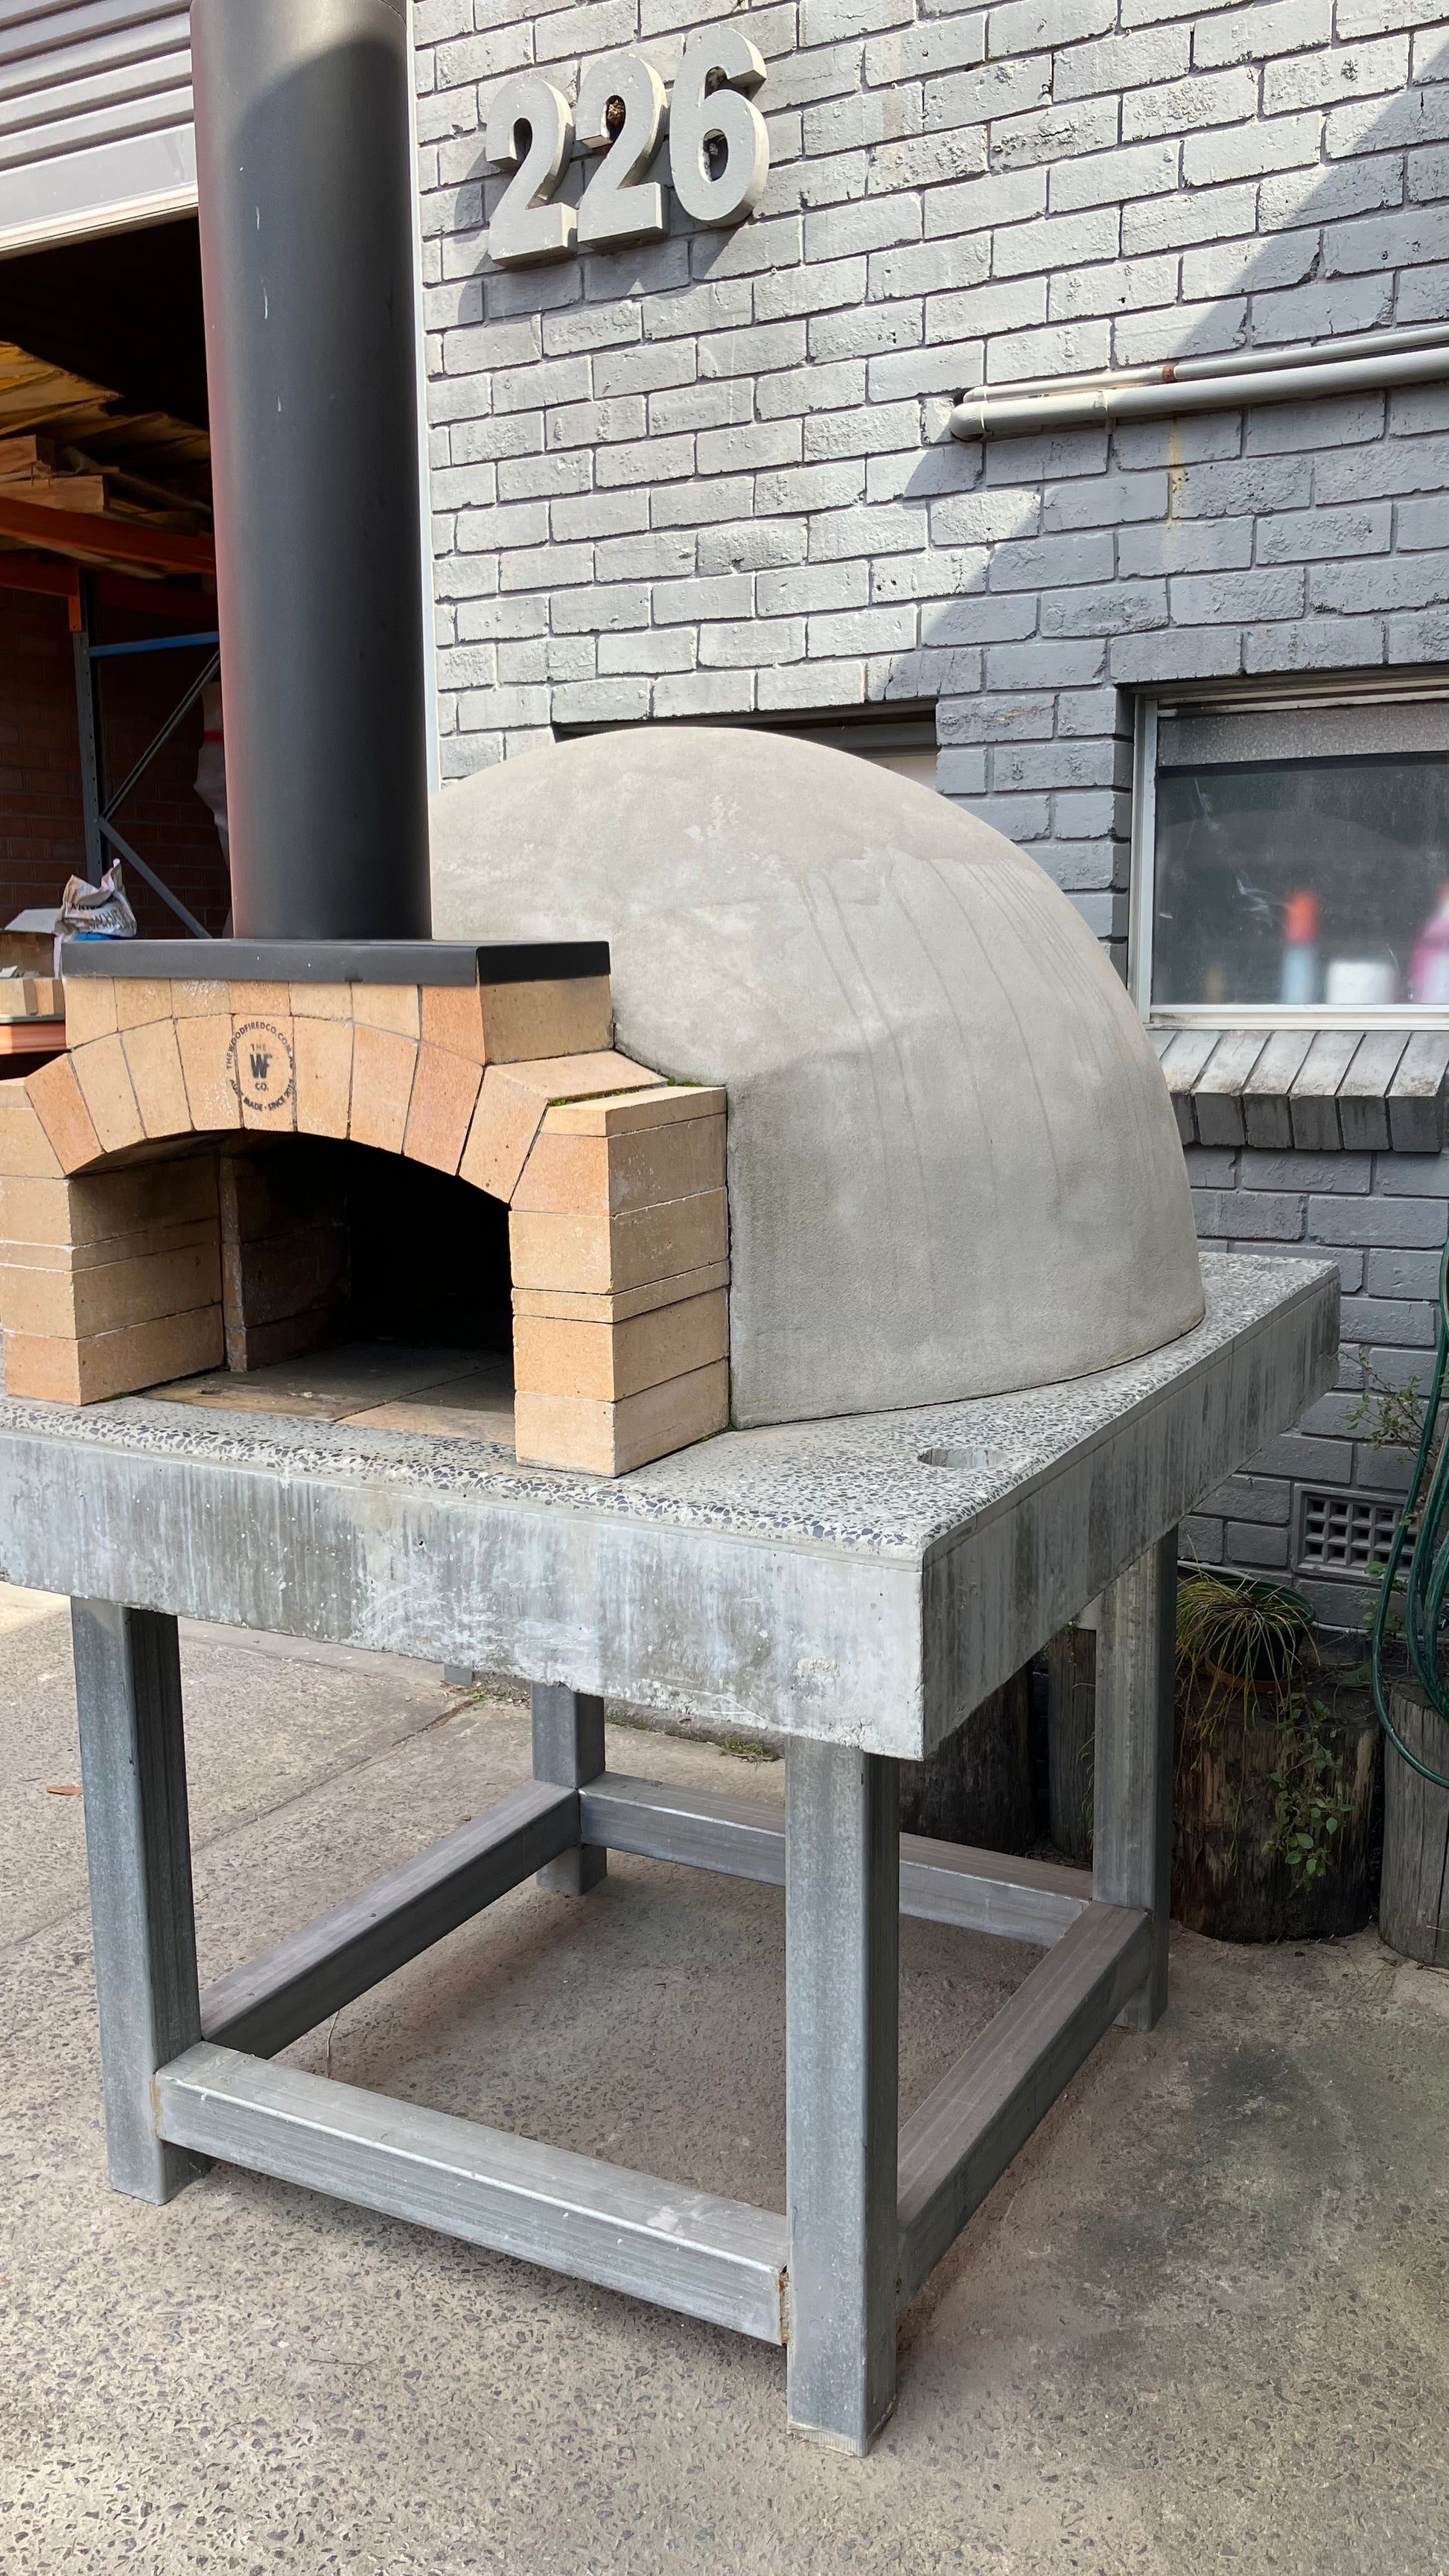 Brick dome 1000mm Oven display wood fired - The Woodfired Co